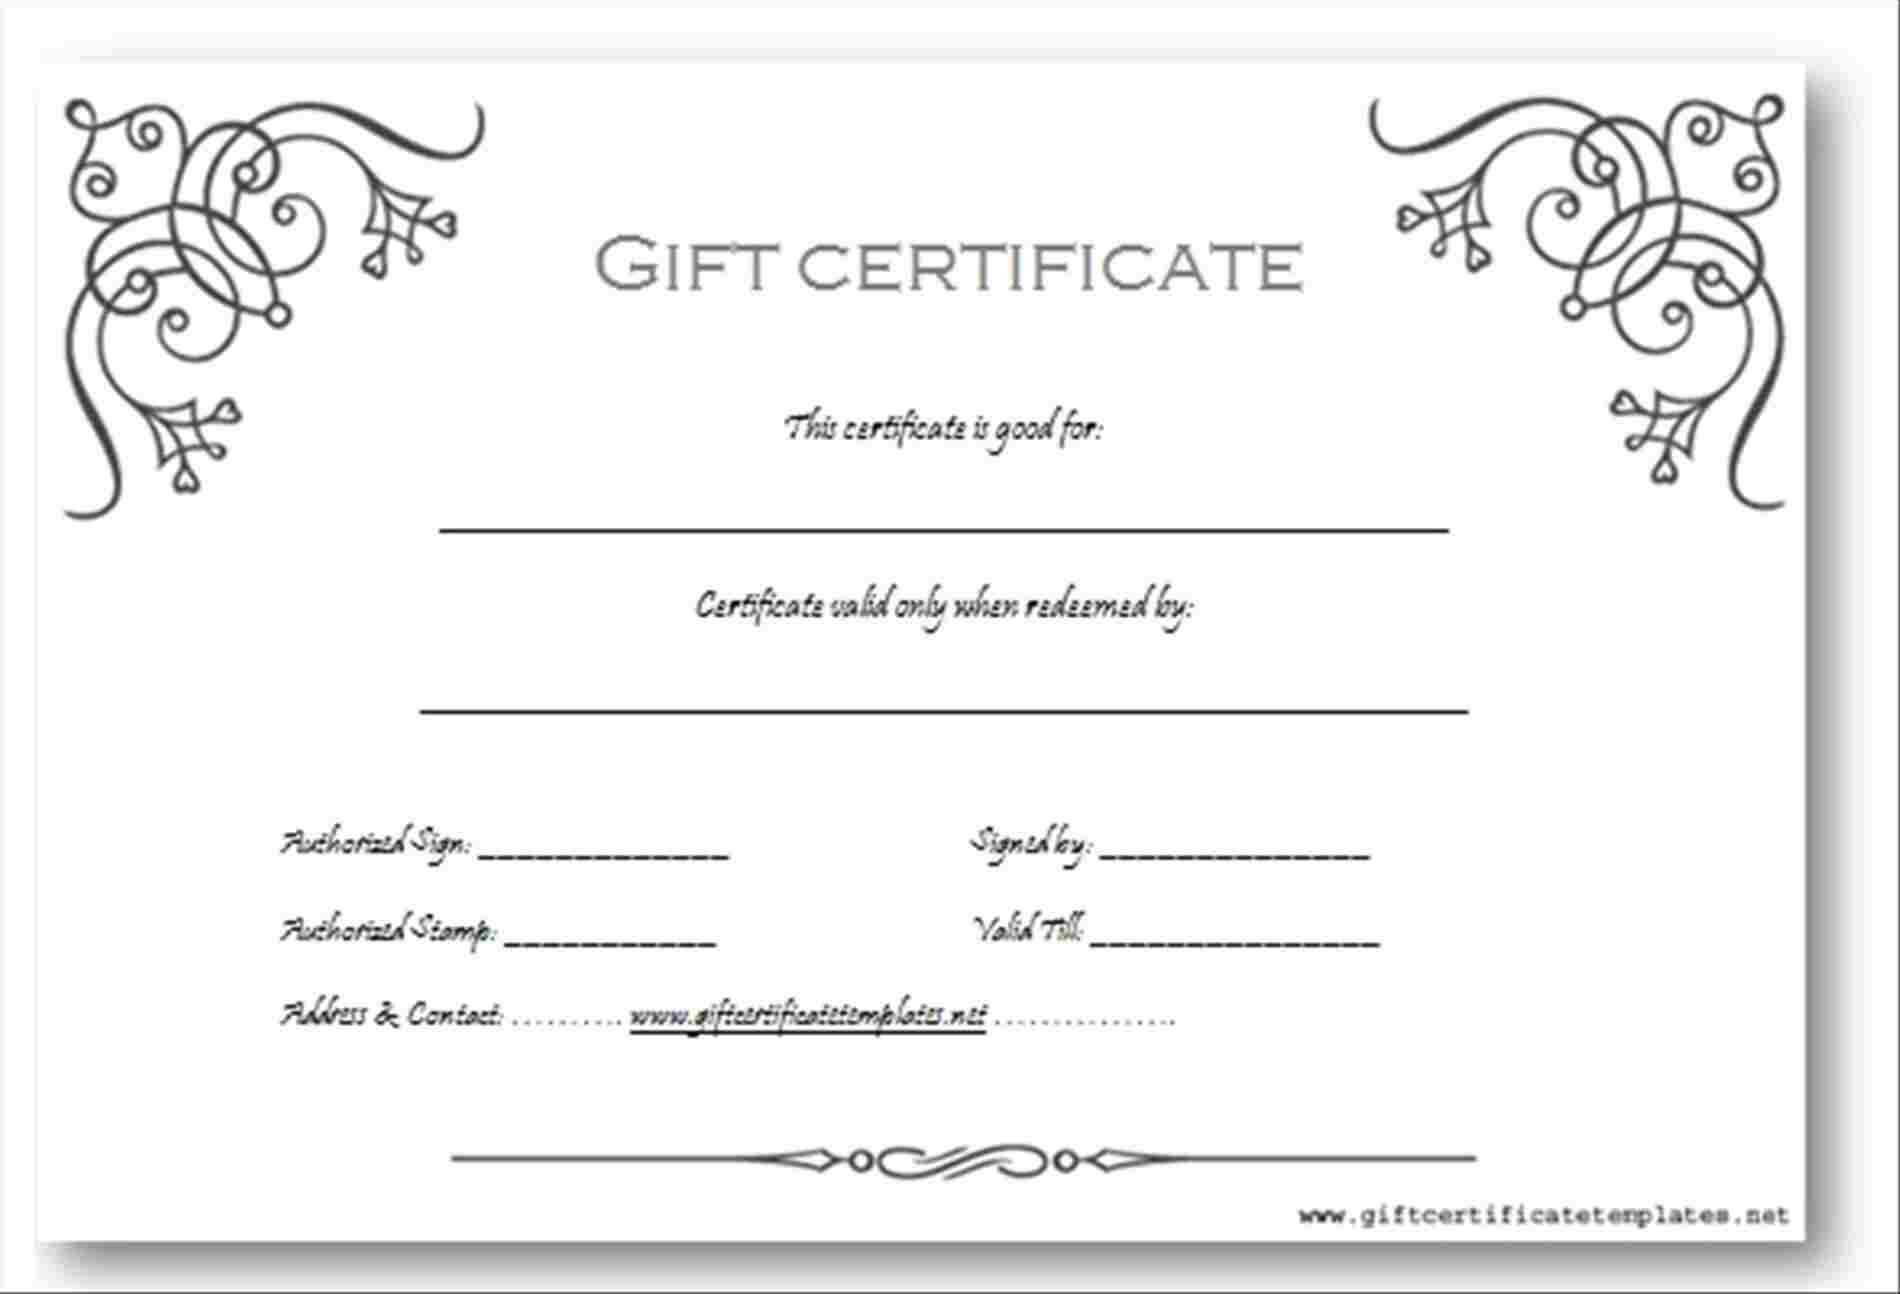 012 Gift Card Template Free Photographer Certificate With Regard To Black And White Gift Certificate Template Free